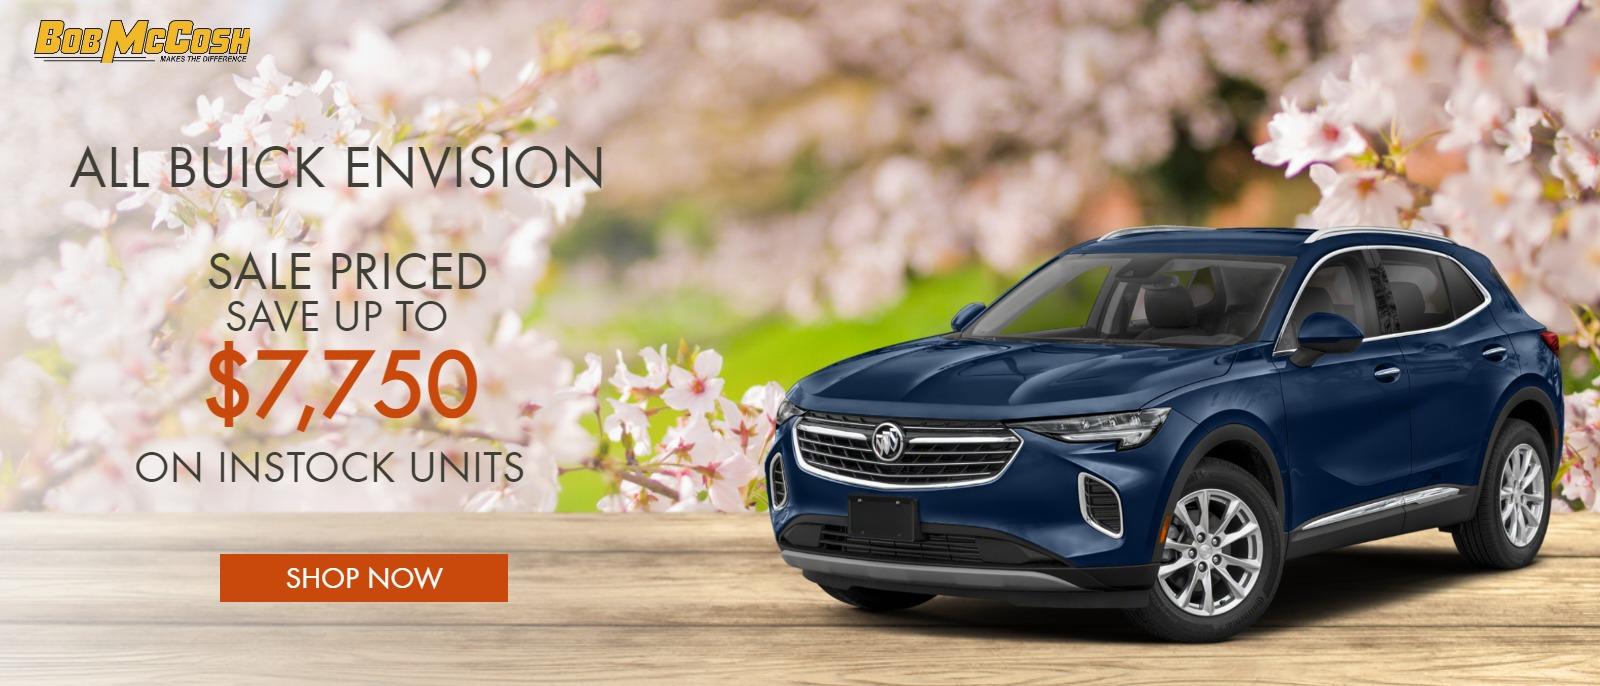 ALL BUICK ENVISIONS SALE PRICED , 
SAVE UP TO $7750 ON INSTOCK UNITS.